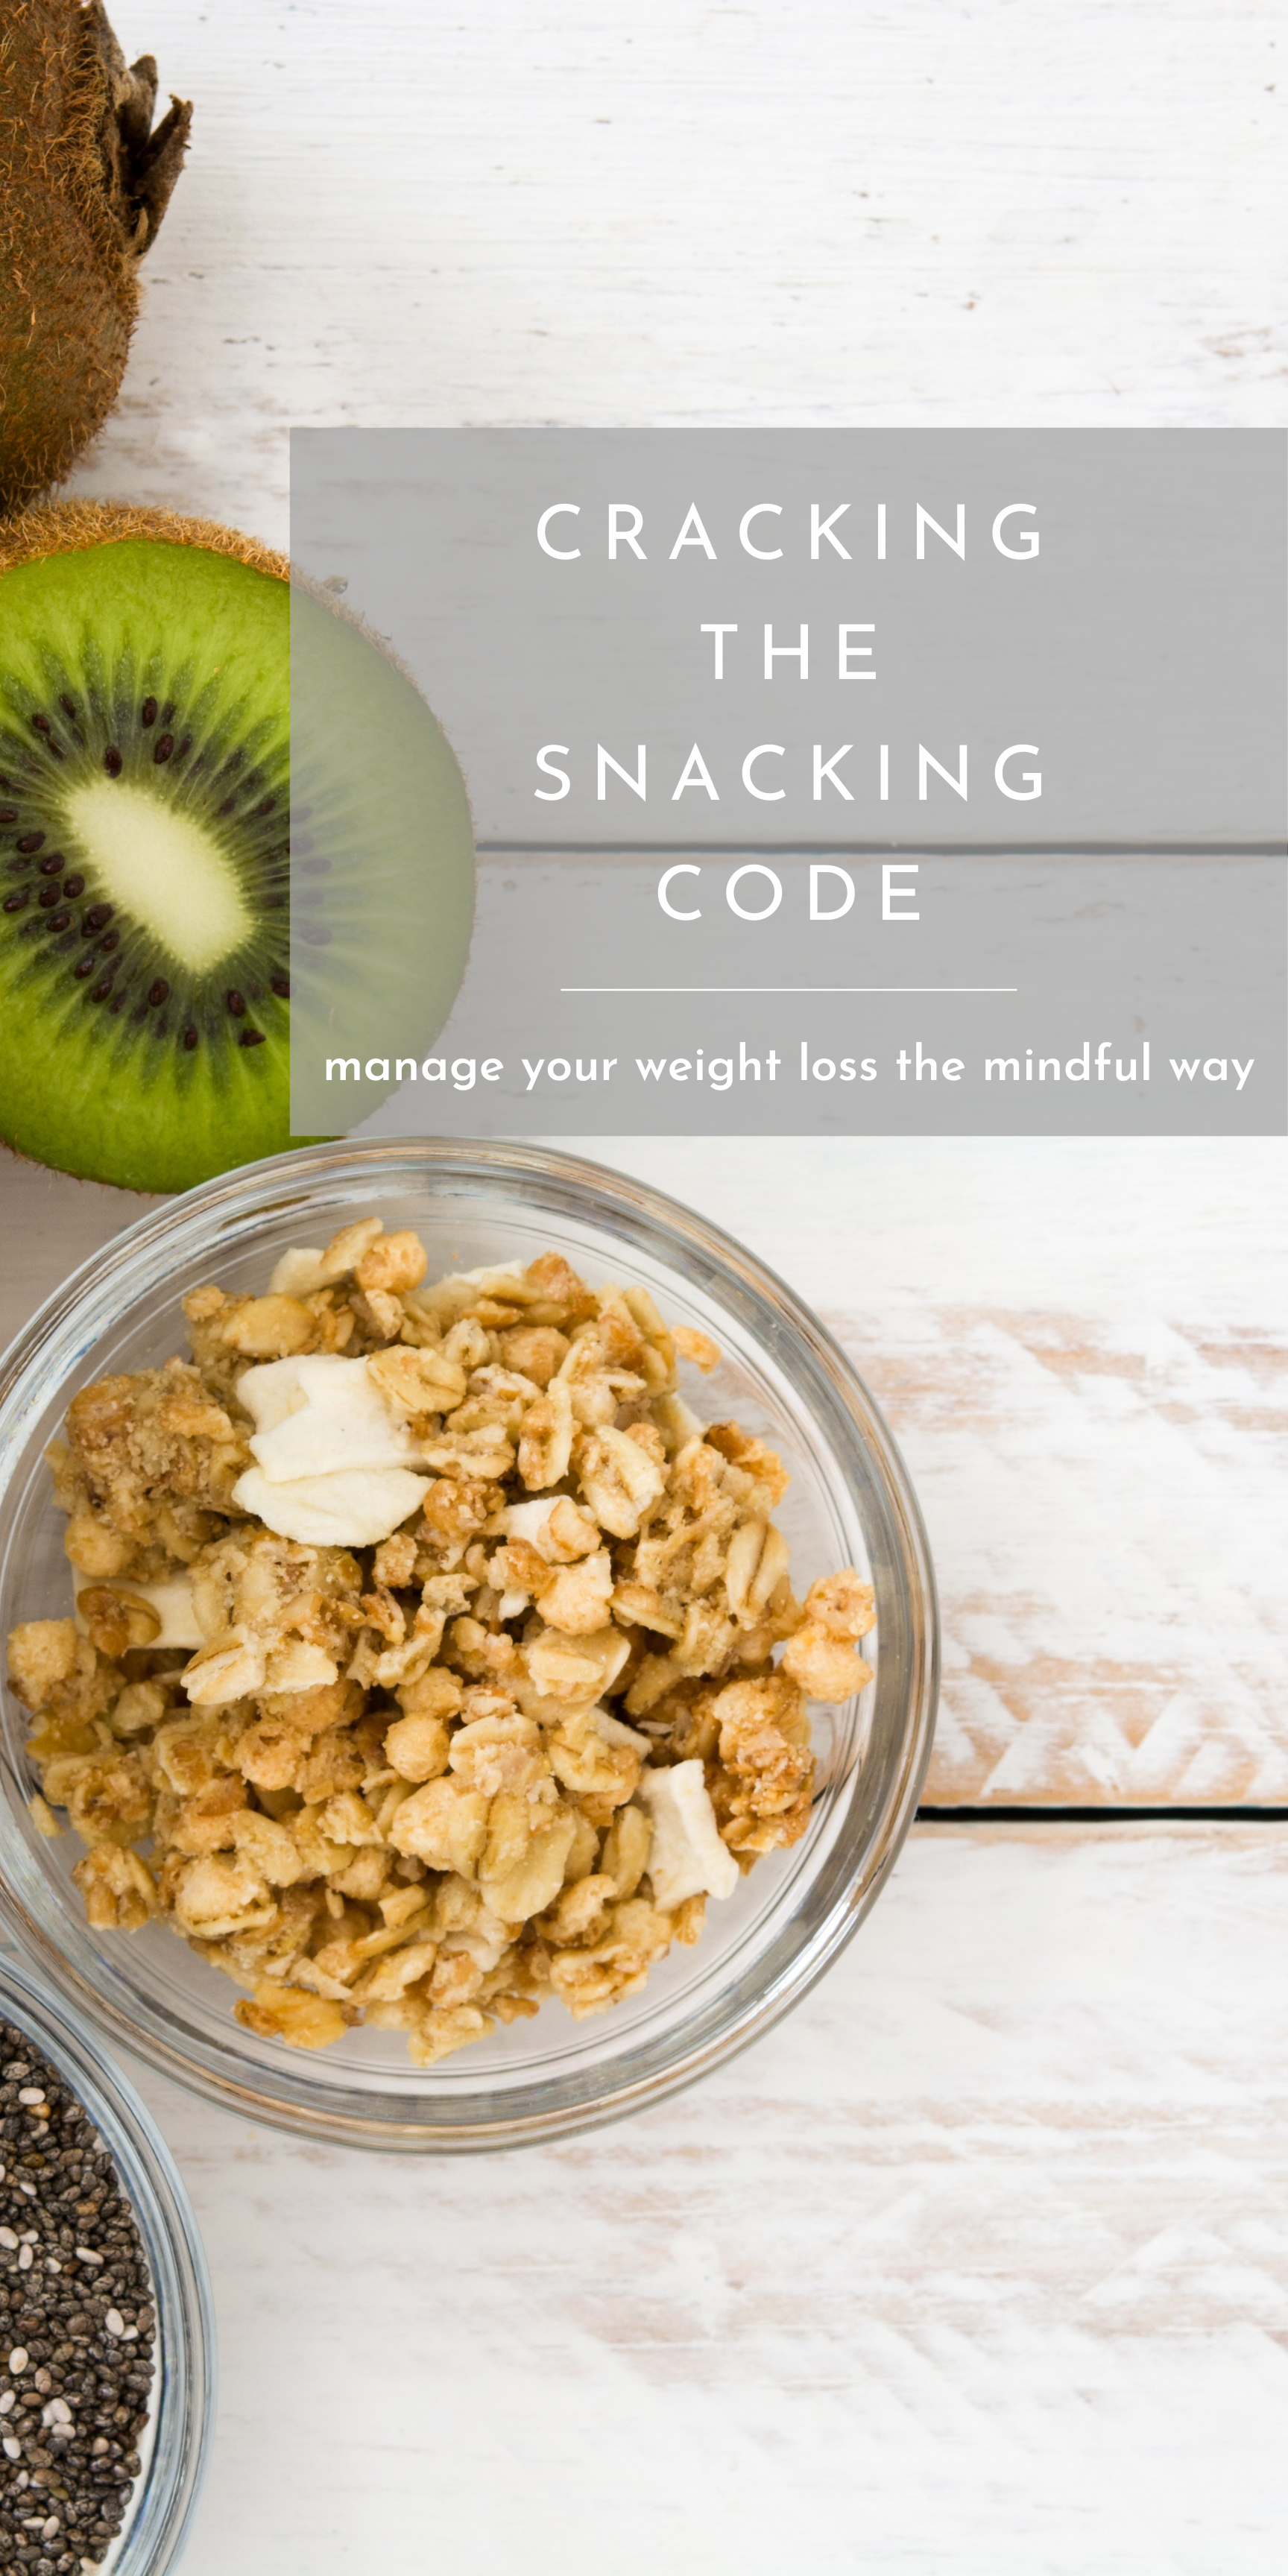 manage-your-weight-loss-the-mindful-way